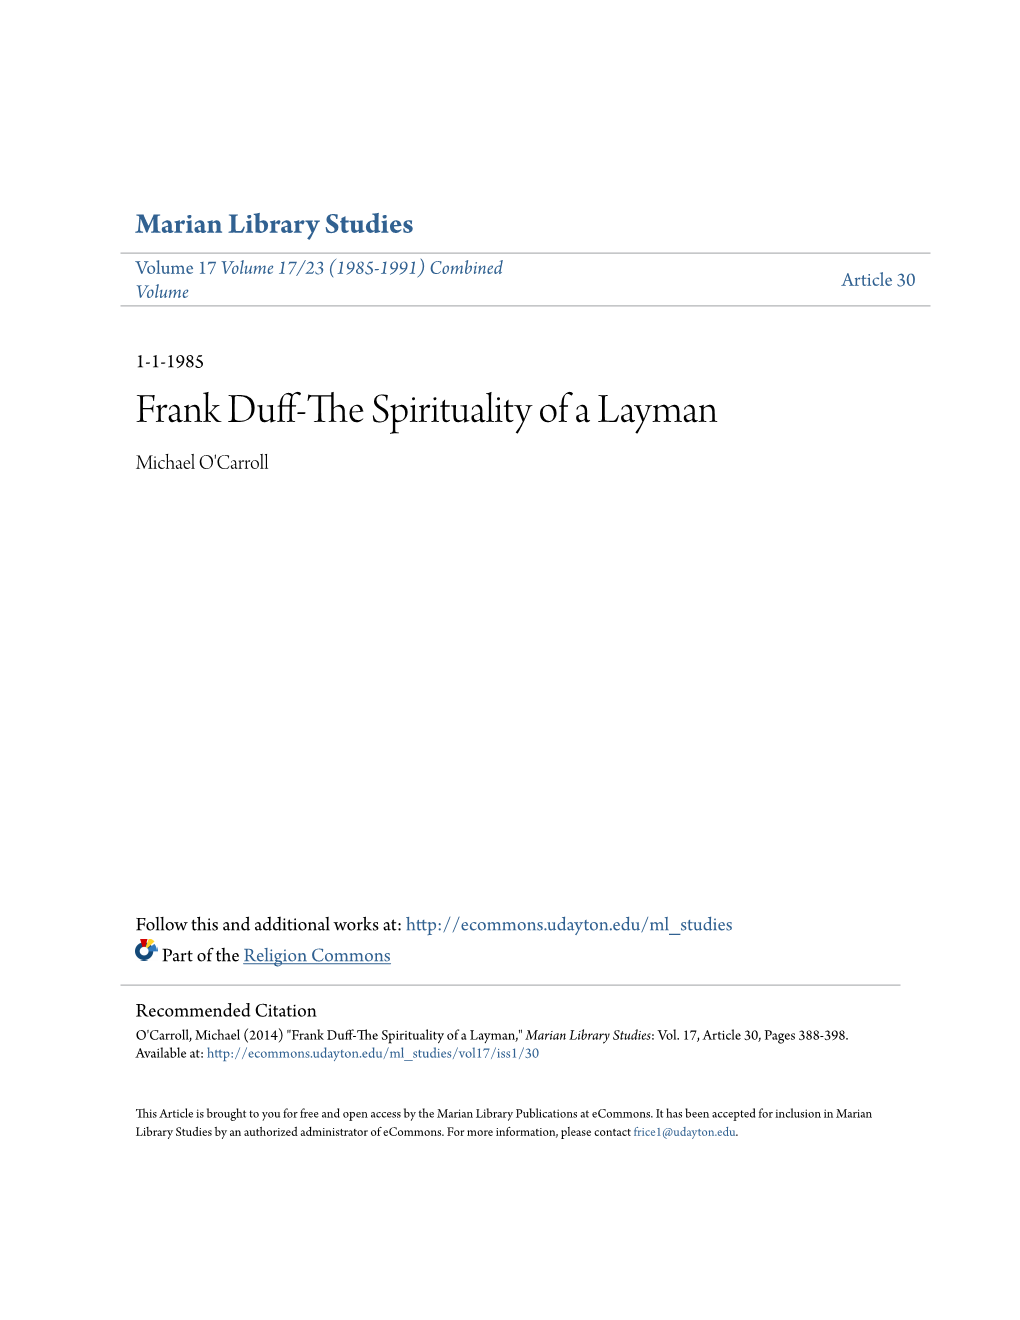 Frank Duff-The Spirituality of a Layman